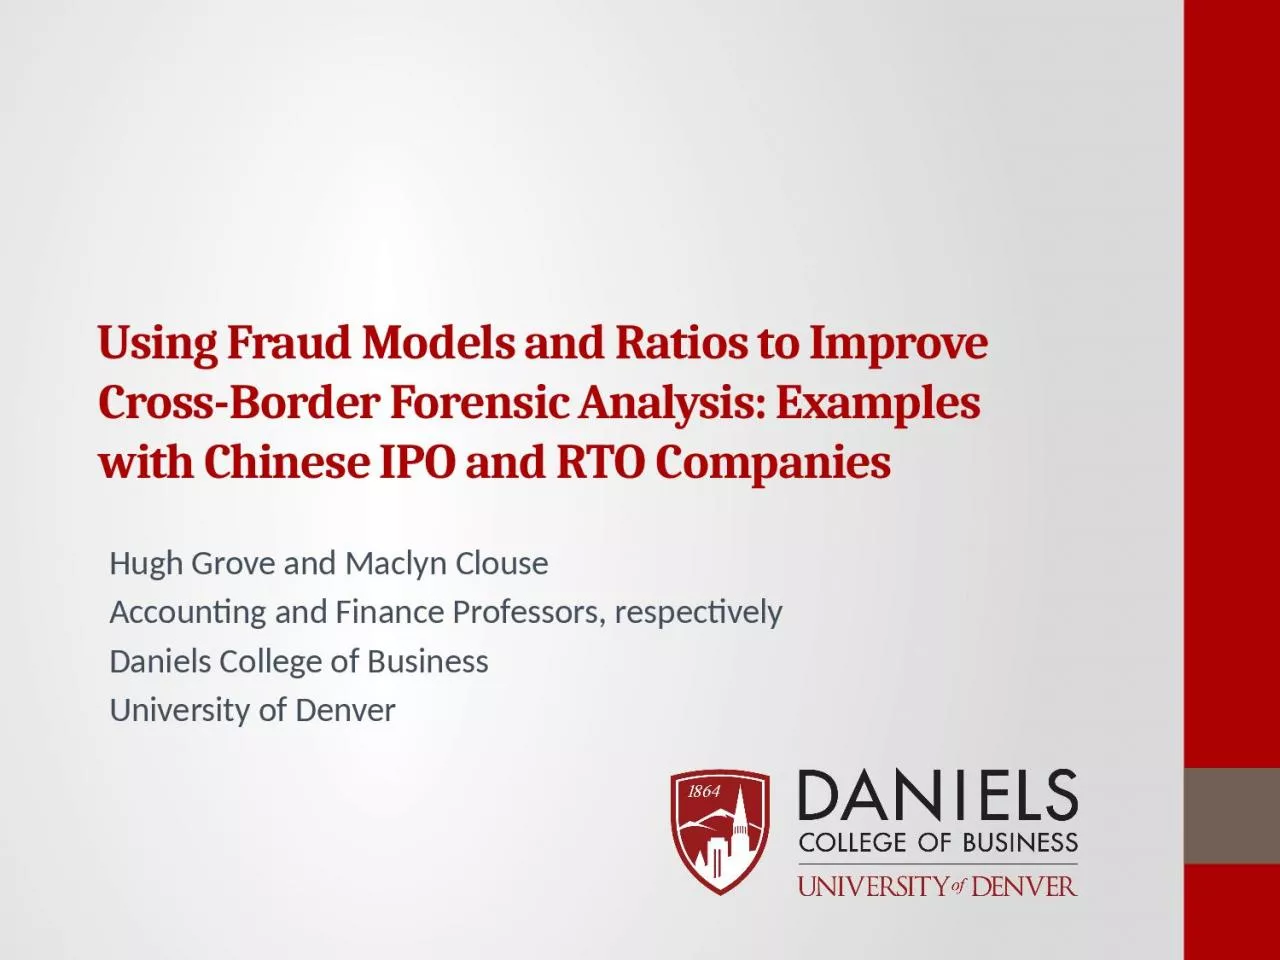 Using Fraud Models and Ratios to Improve Cross-Border Forensic Analysis: Examples with